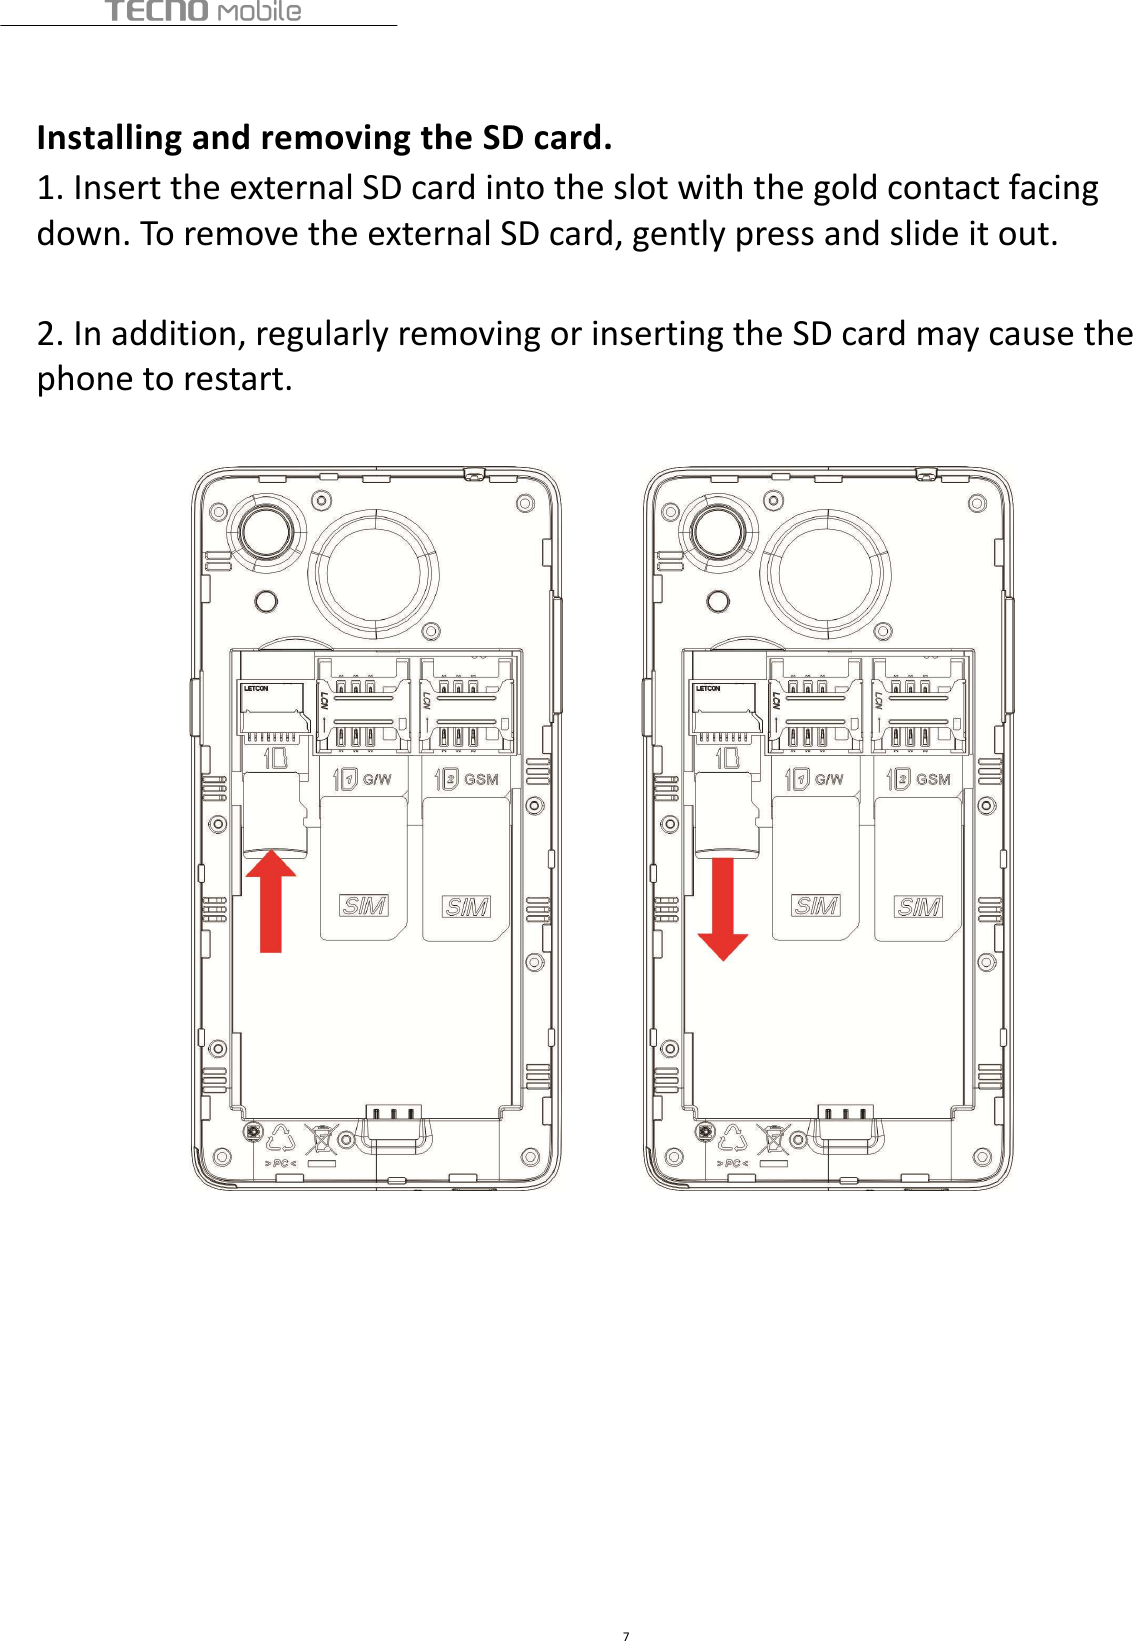  7   Installing and removing the SD card. 1. Insert the external SD card into the slot with the gold contact facing down. To remove the external SD card, gently press and slide it out.  2. In addition, regularly removing or inserting the SD card may cause the phone to restart.               